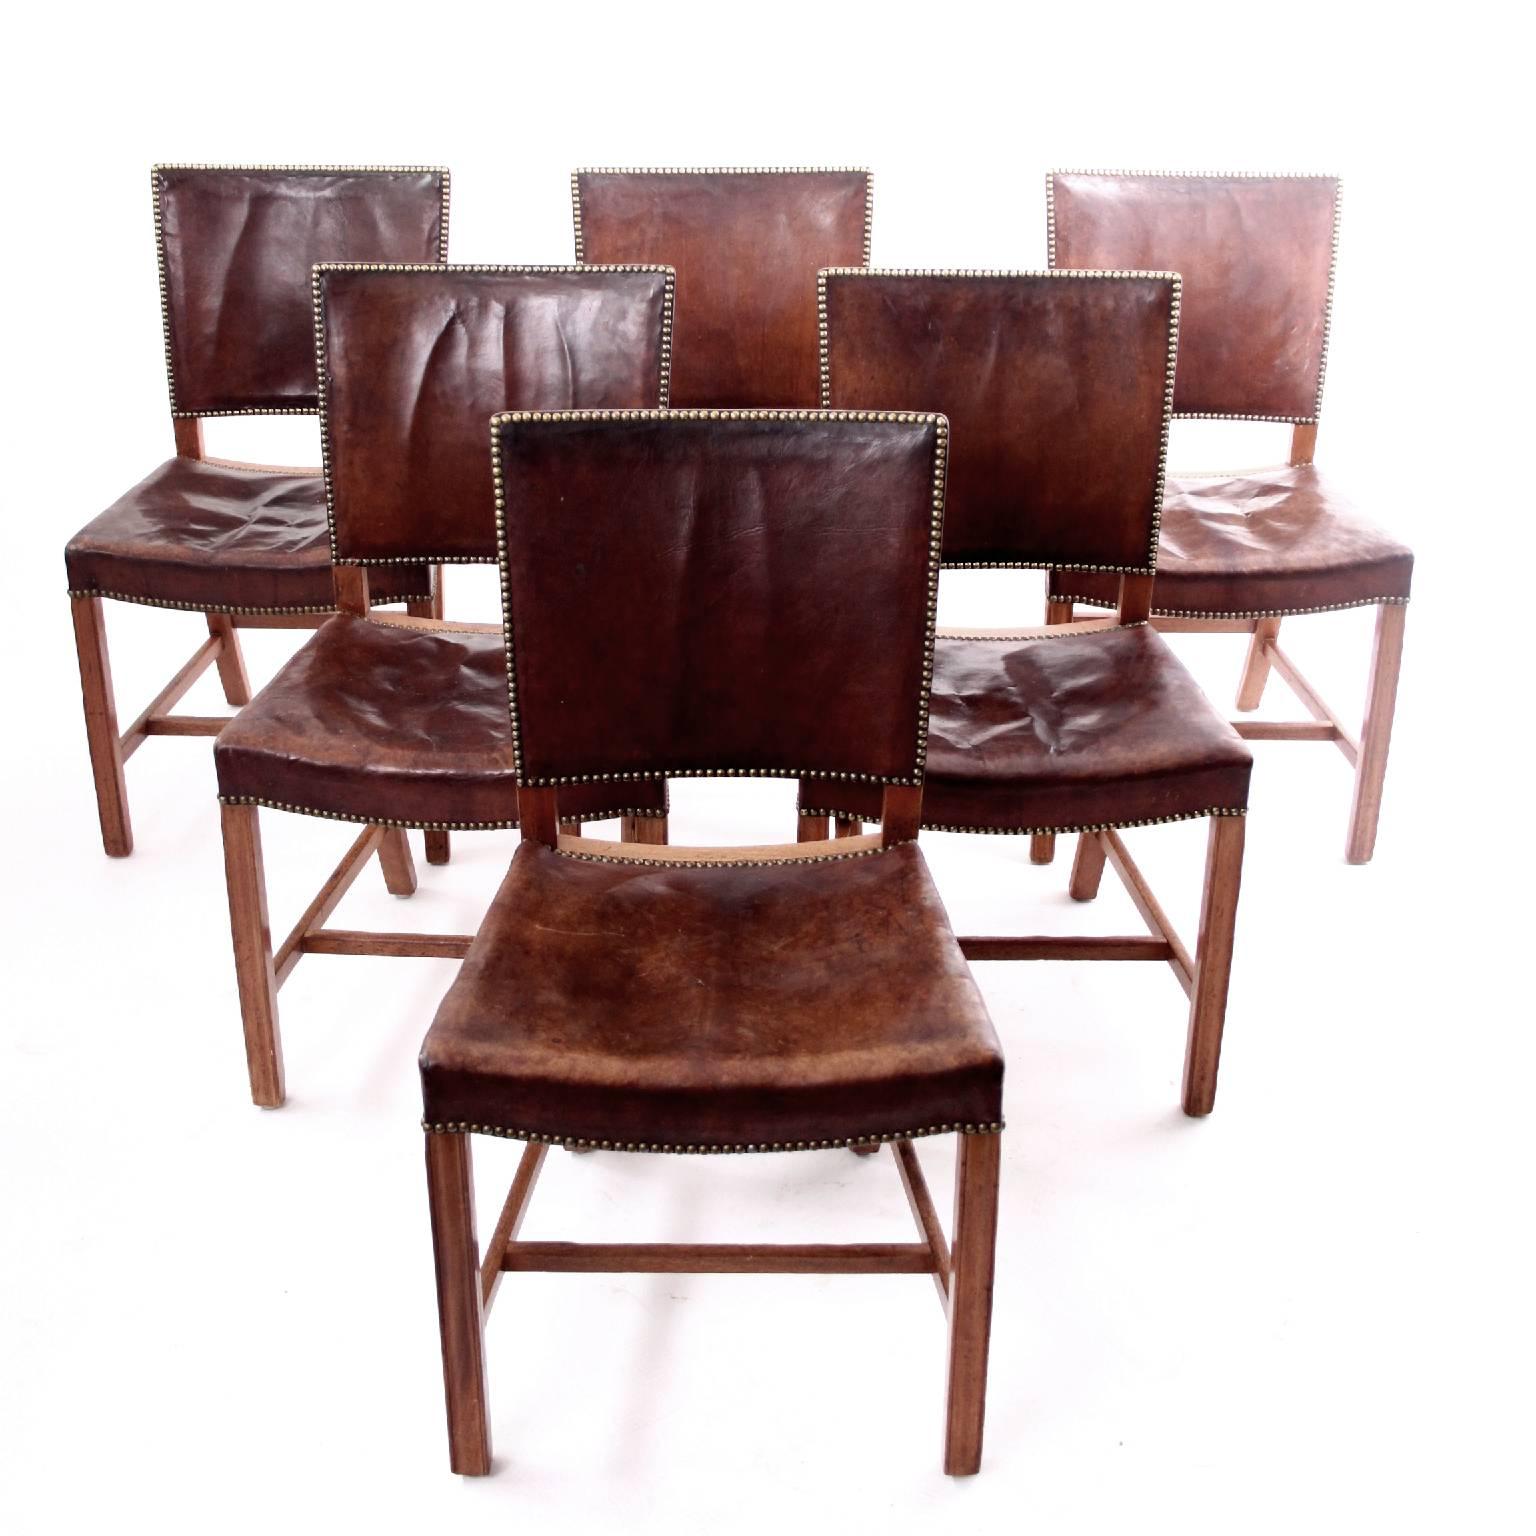 KAARE KLINT & RUD RASMUSSEN SNEDKERIER  -  SCANDINAVIAN MODERN

A set of six very early Kaare Klint 'Red Chairs', small model, all from the same provenance, hence same level of patina.  

Profiled legs of mahogany, seat and back upholstered with